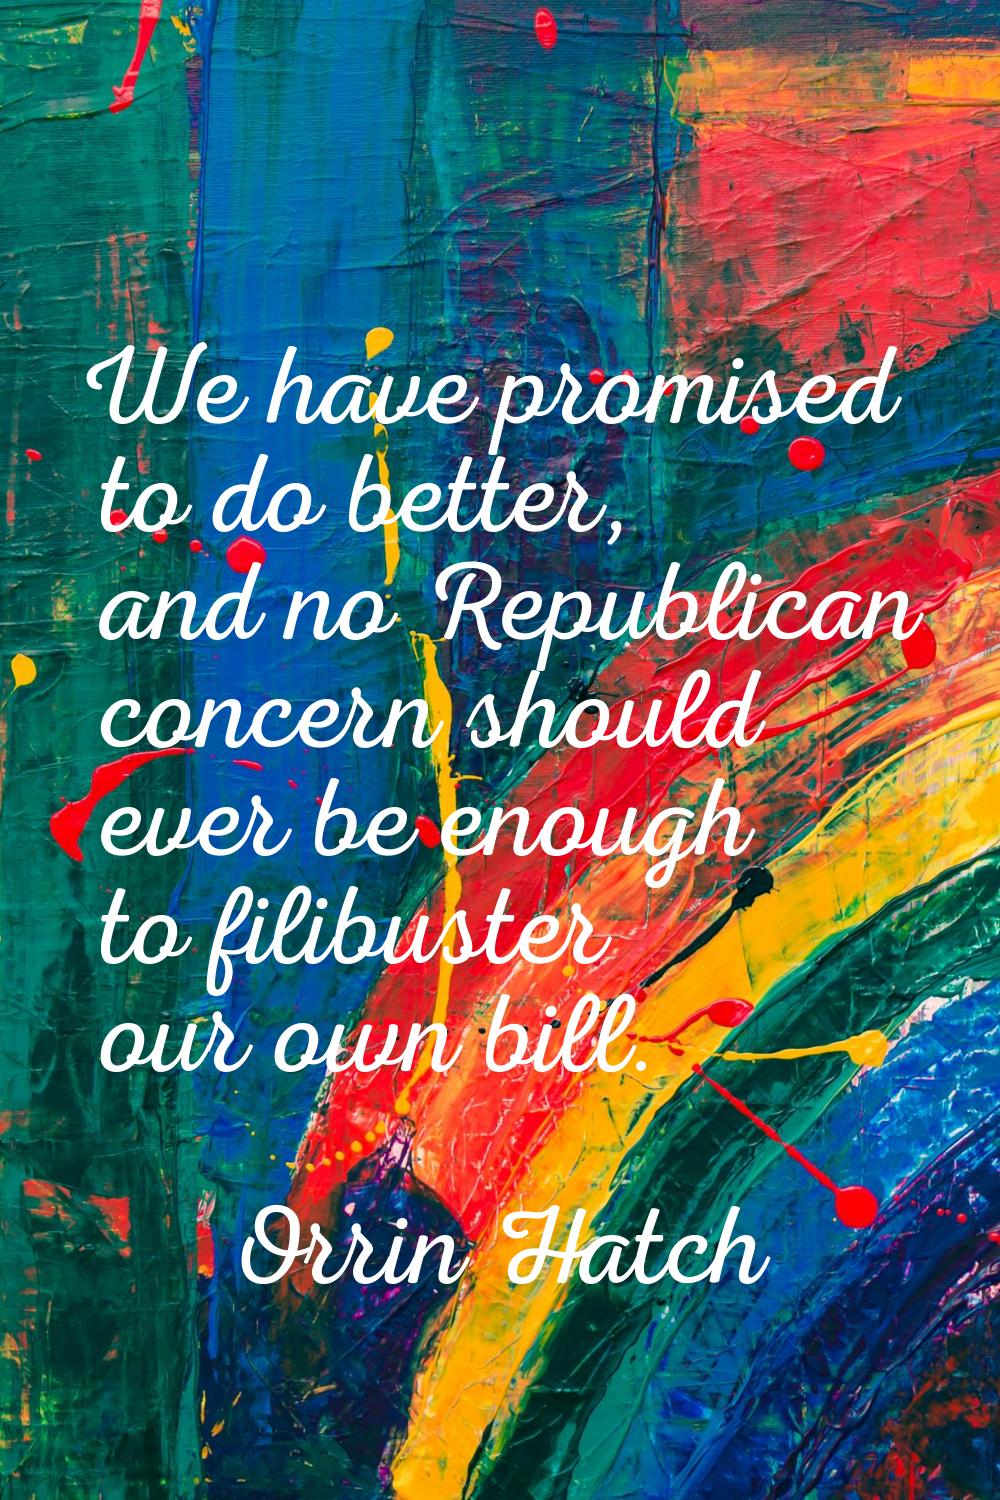 We have promised to do better, and no Republican concern should ever be enough to filibuster our ow